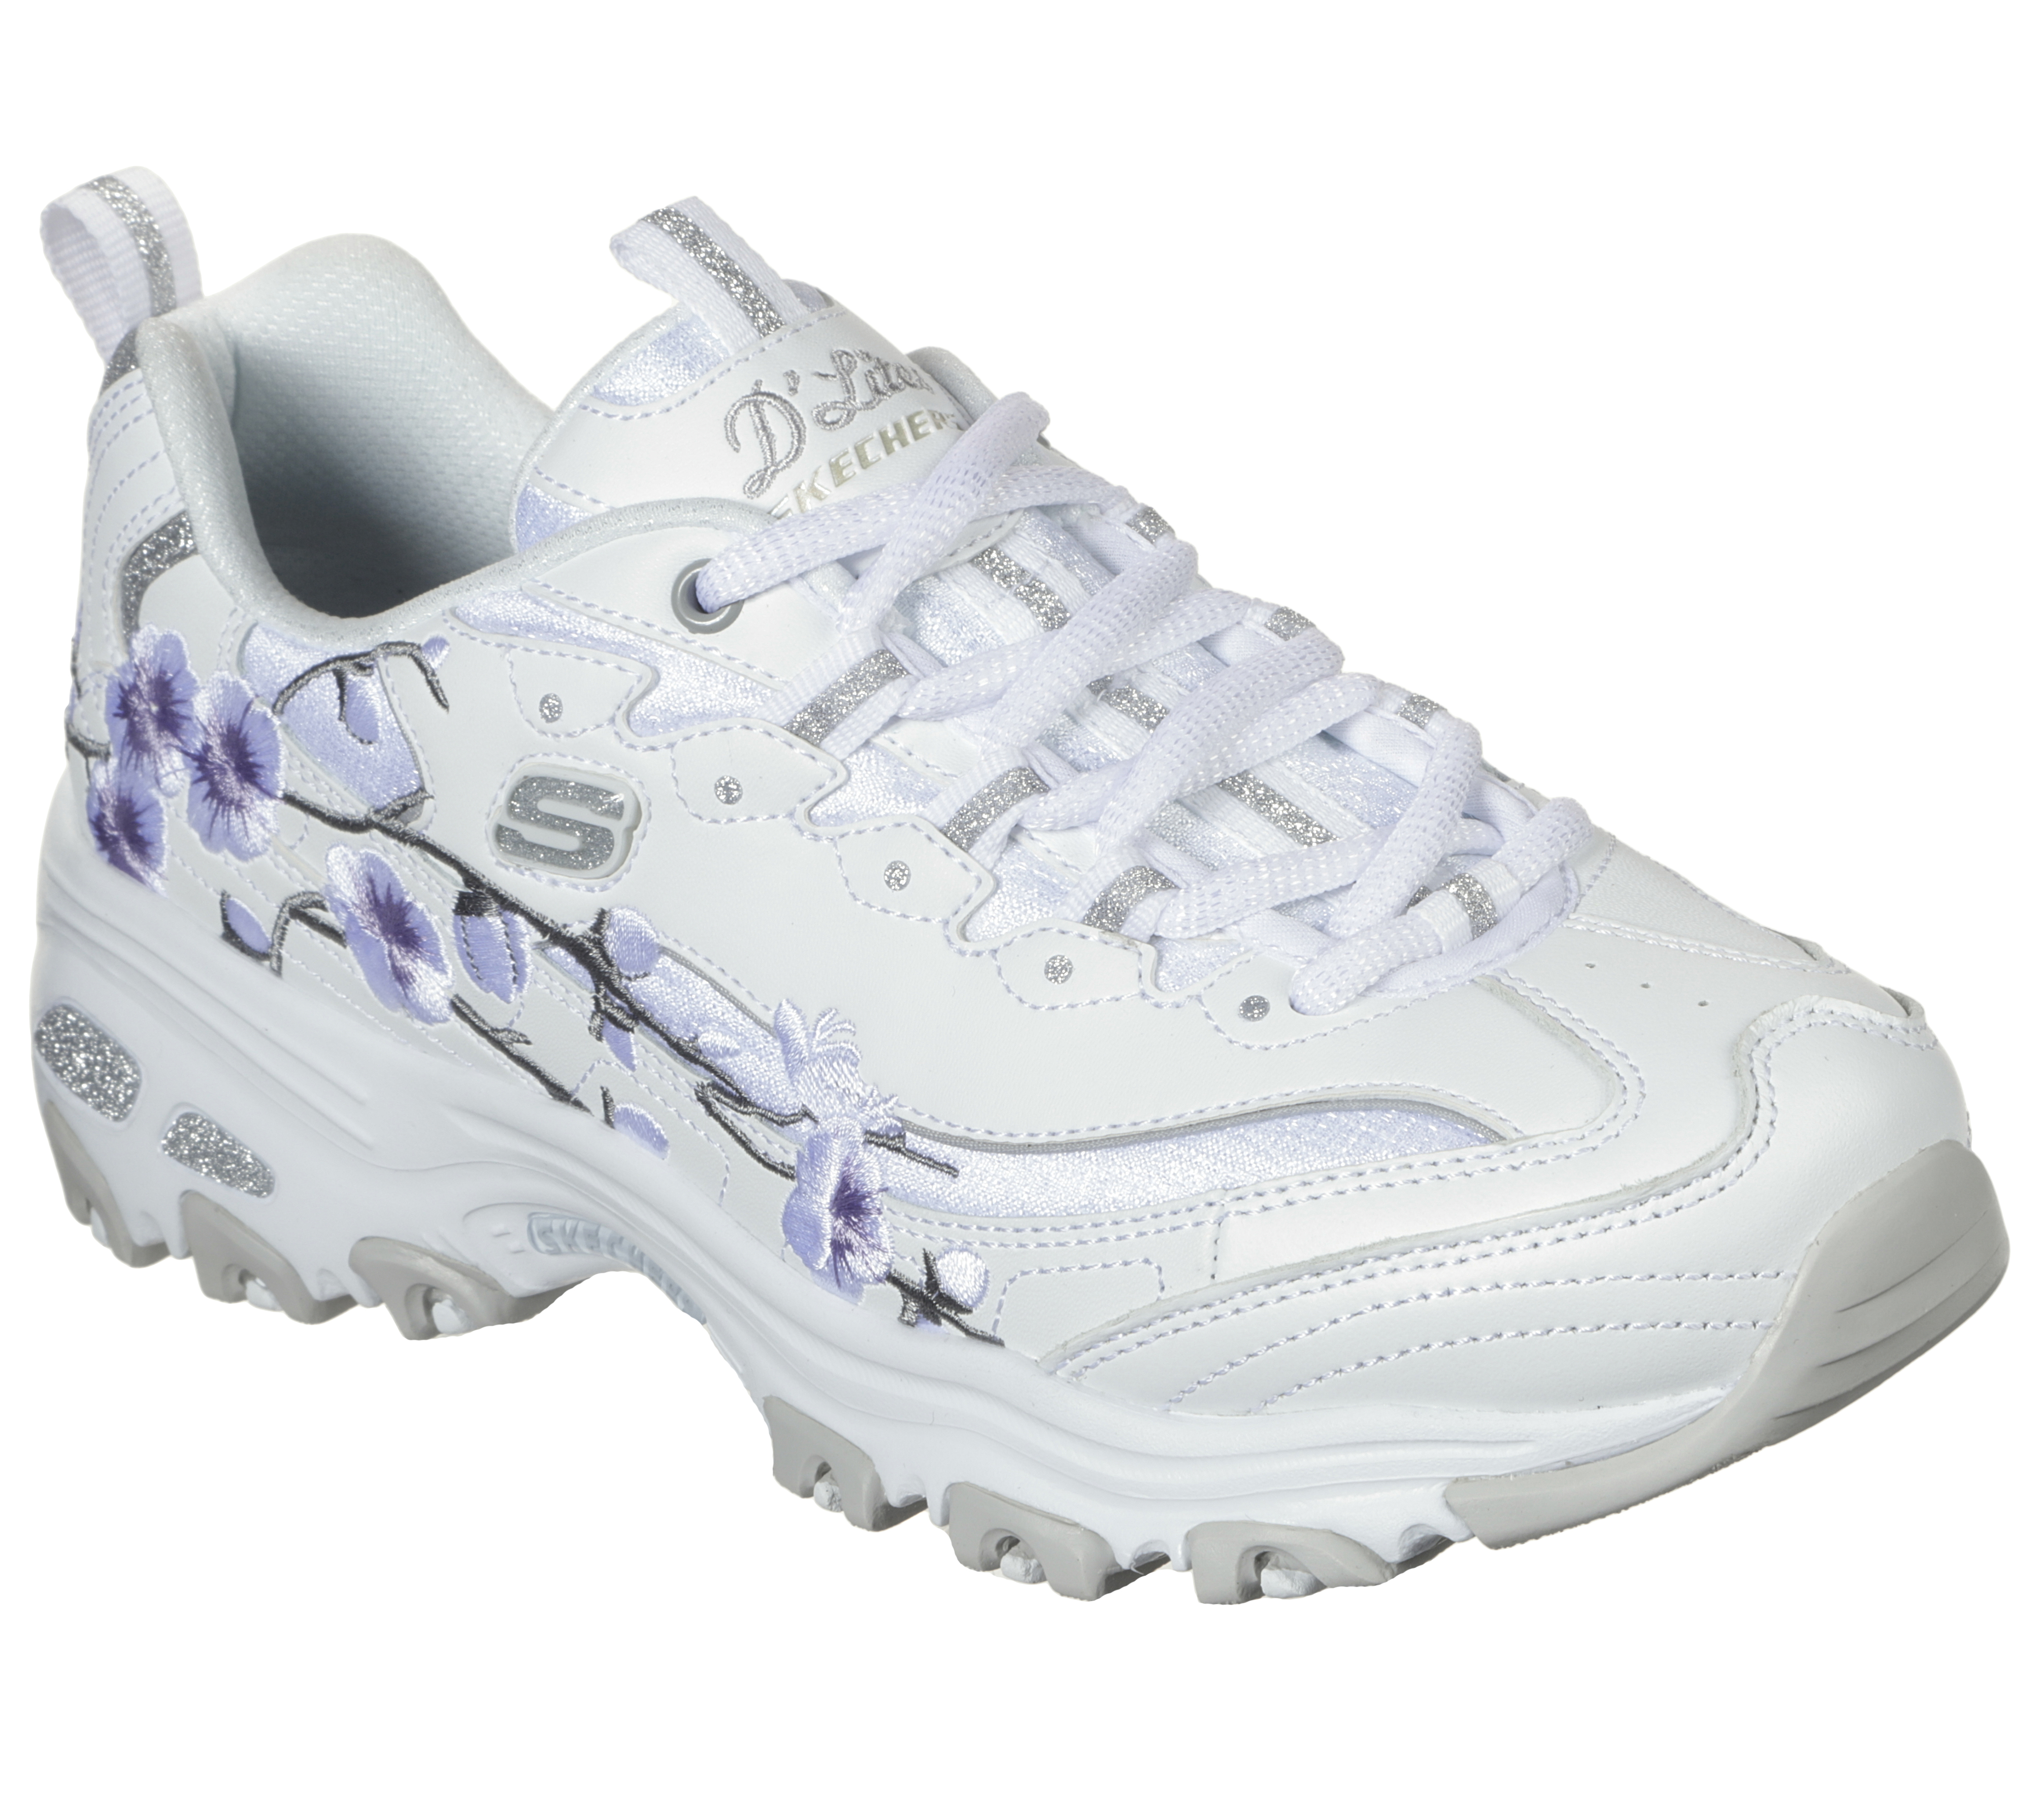 skechers shoes with flowers